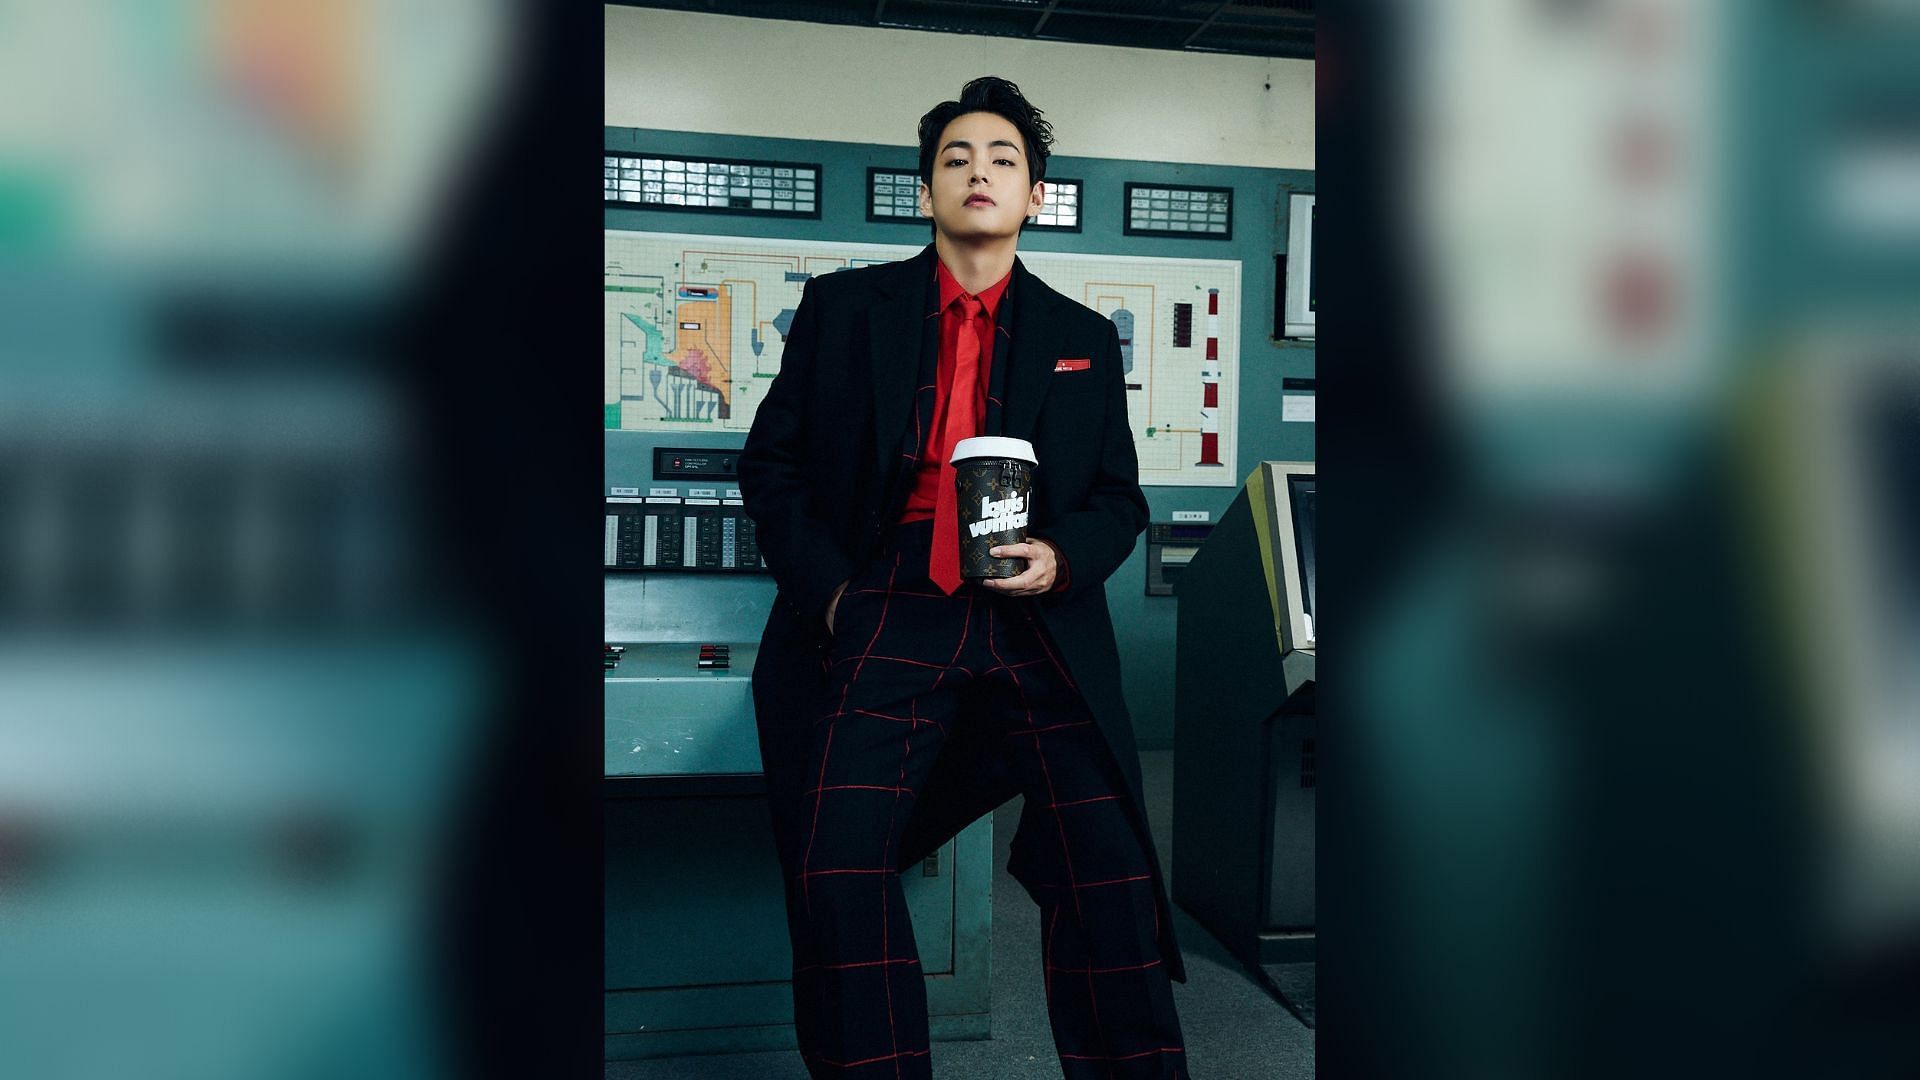 Kim Tae-hyung giving off rich CEO vibes clad in Louis Vuittion (Image via Louis Vuitton)